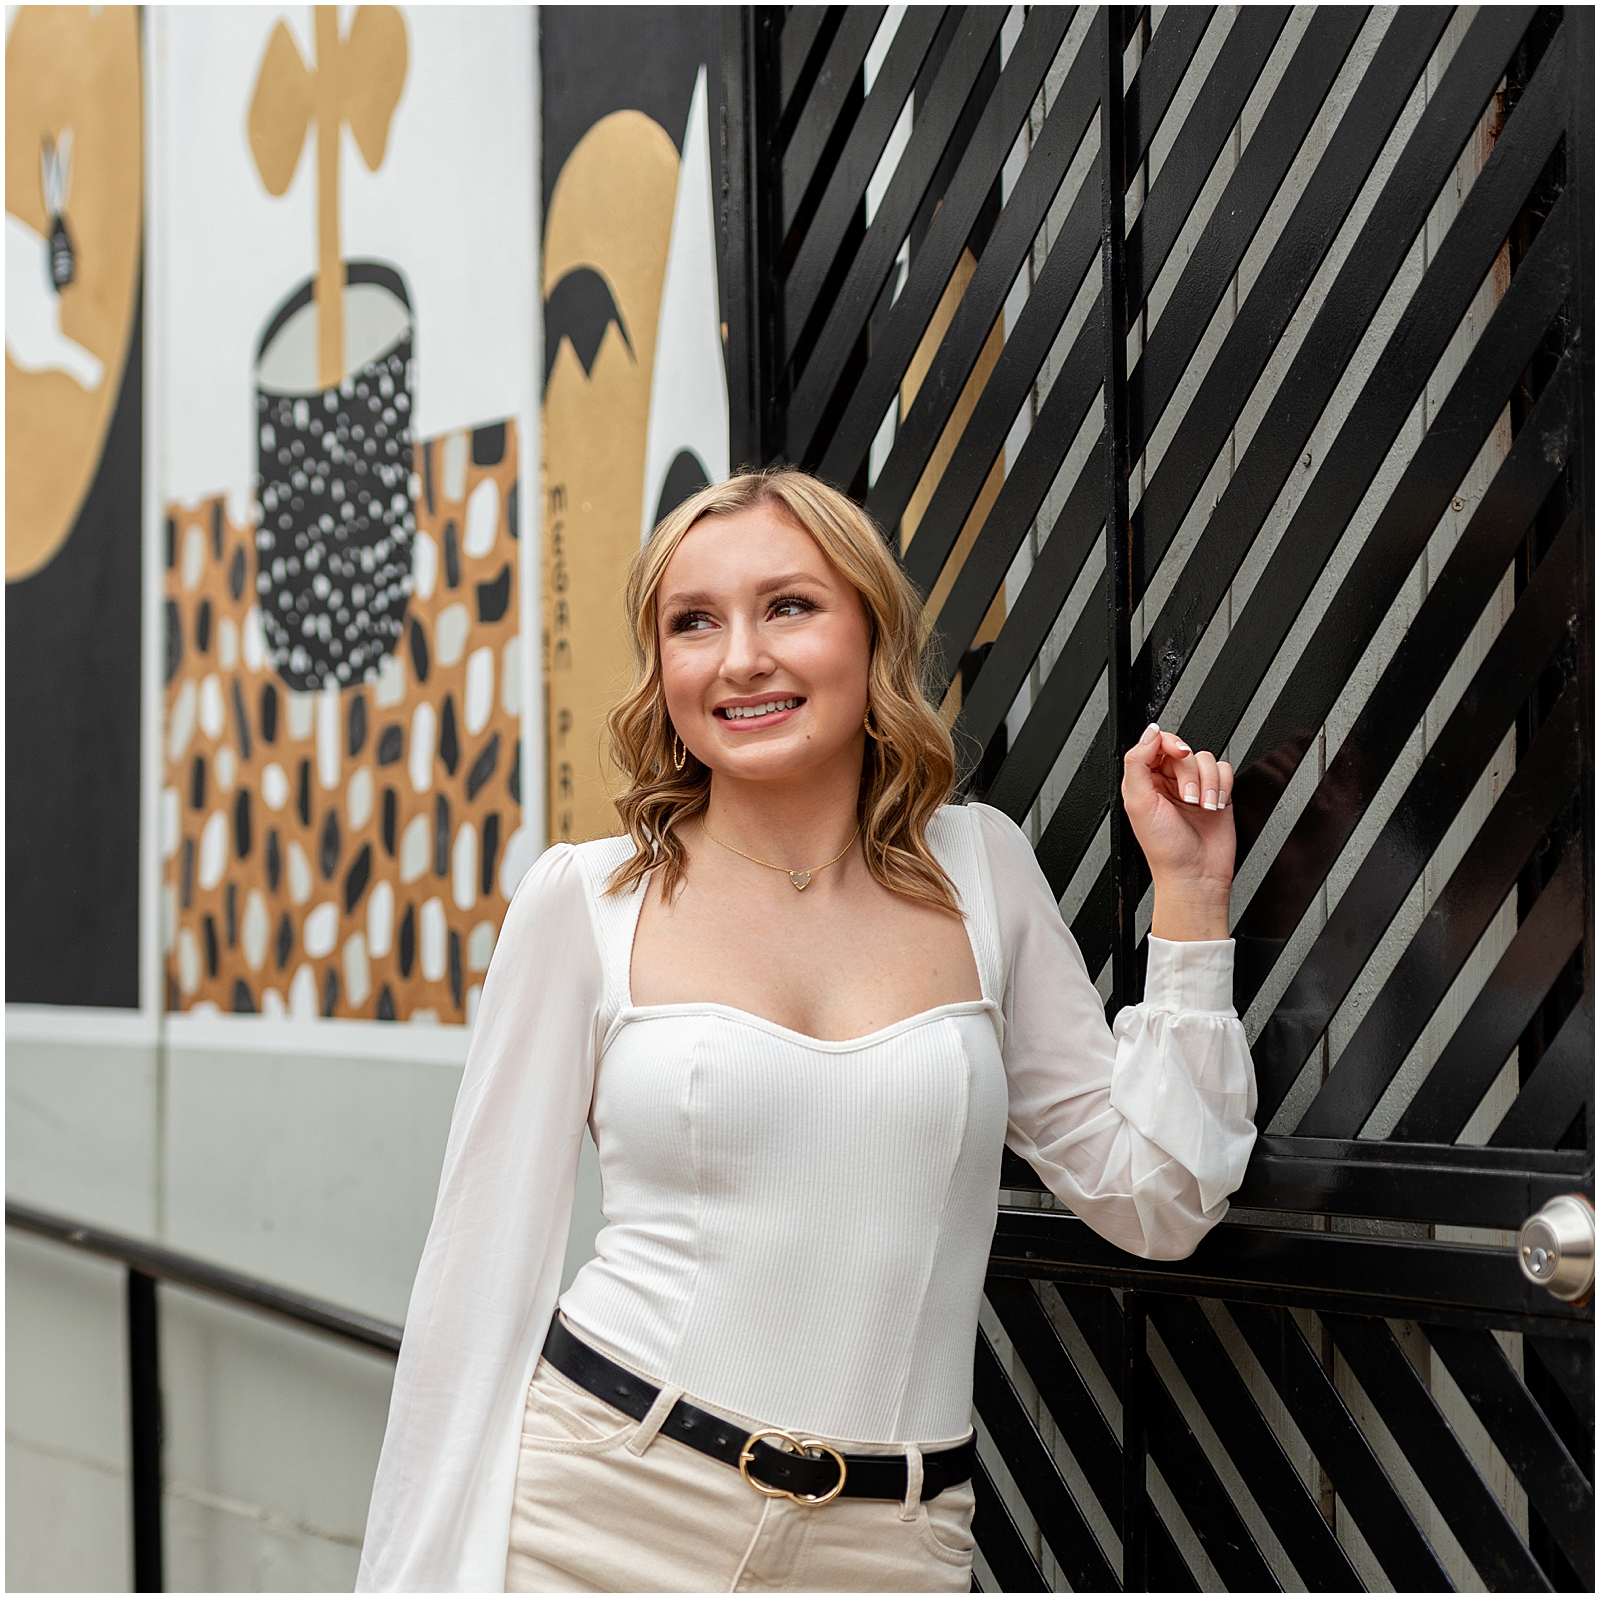 What a Senior Session at SJP Looks Like – high school senior girl wearing cream pants and white shirt standing in front of a mural – Sarah Jane Photography is a high school senior photographer serving Bourbonnais & Chicagoland.